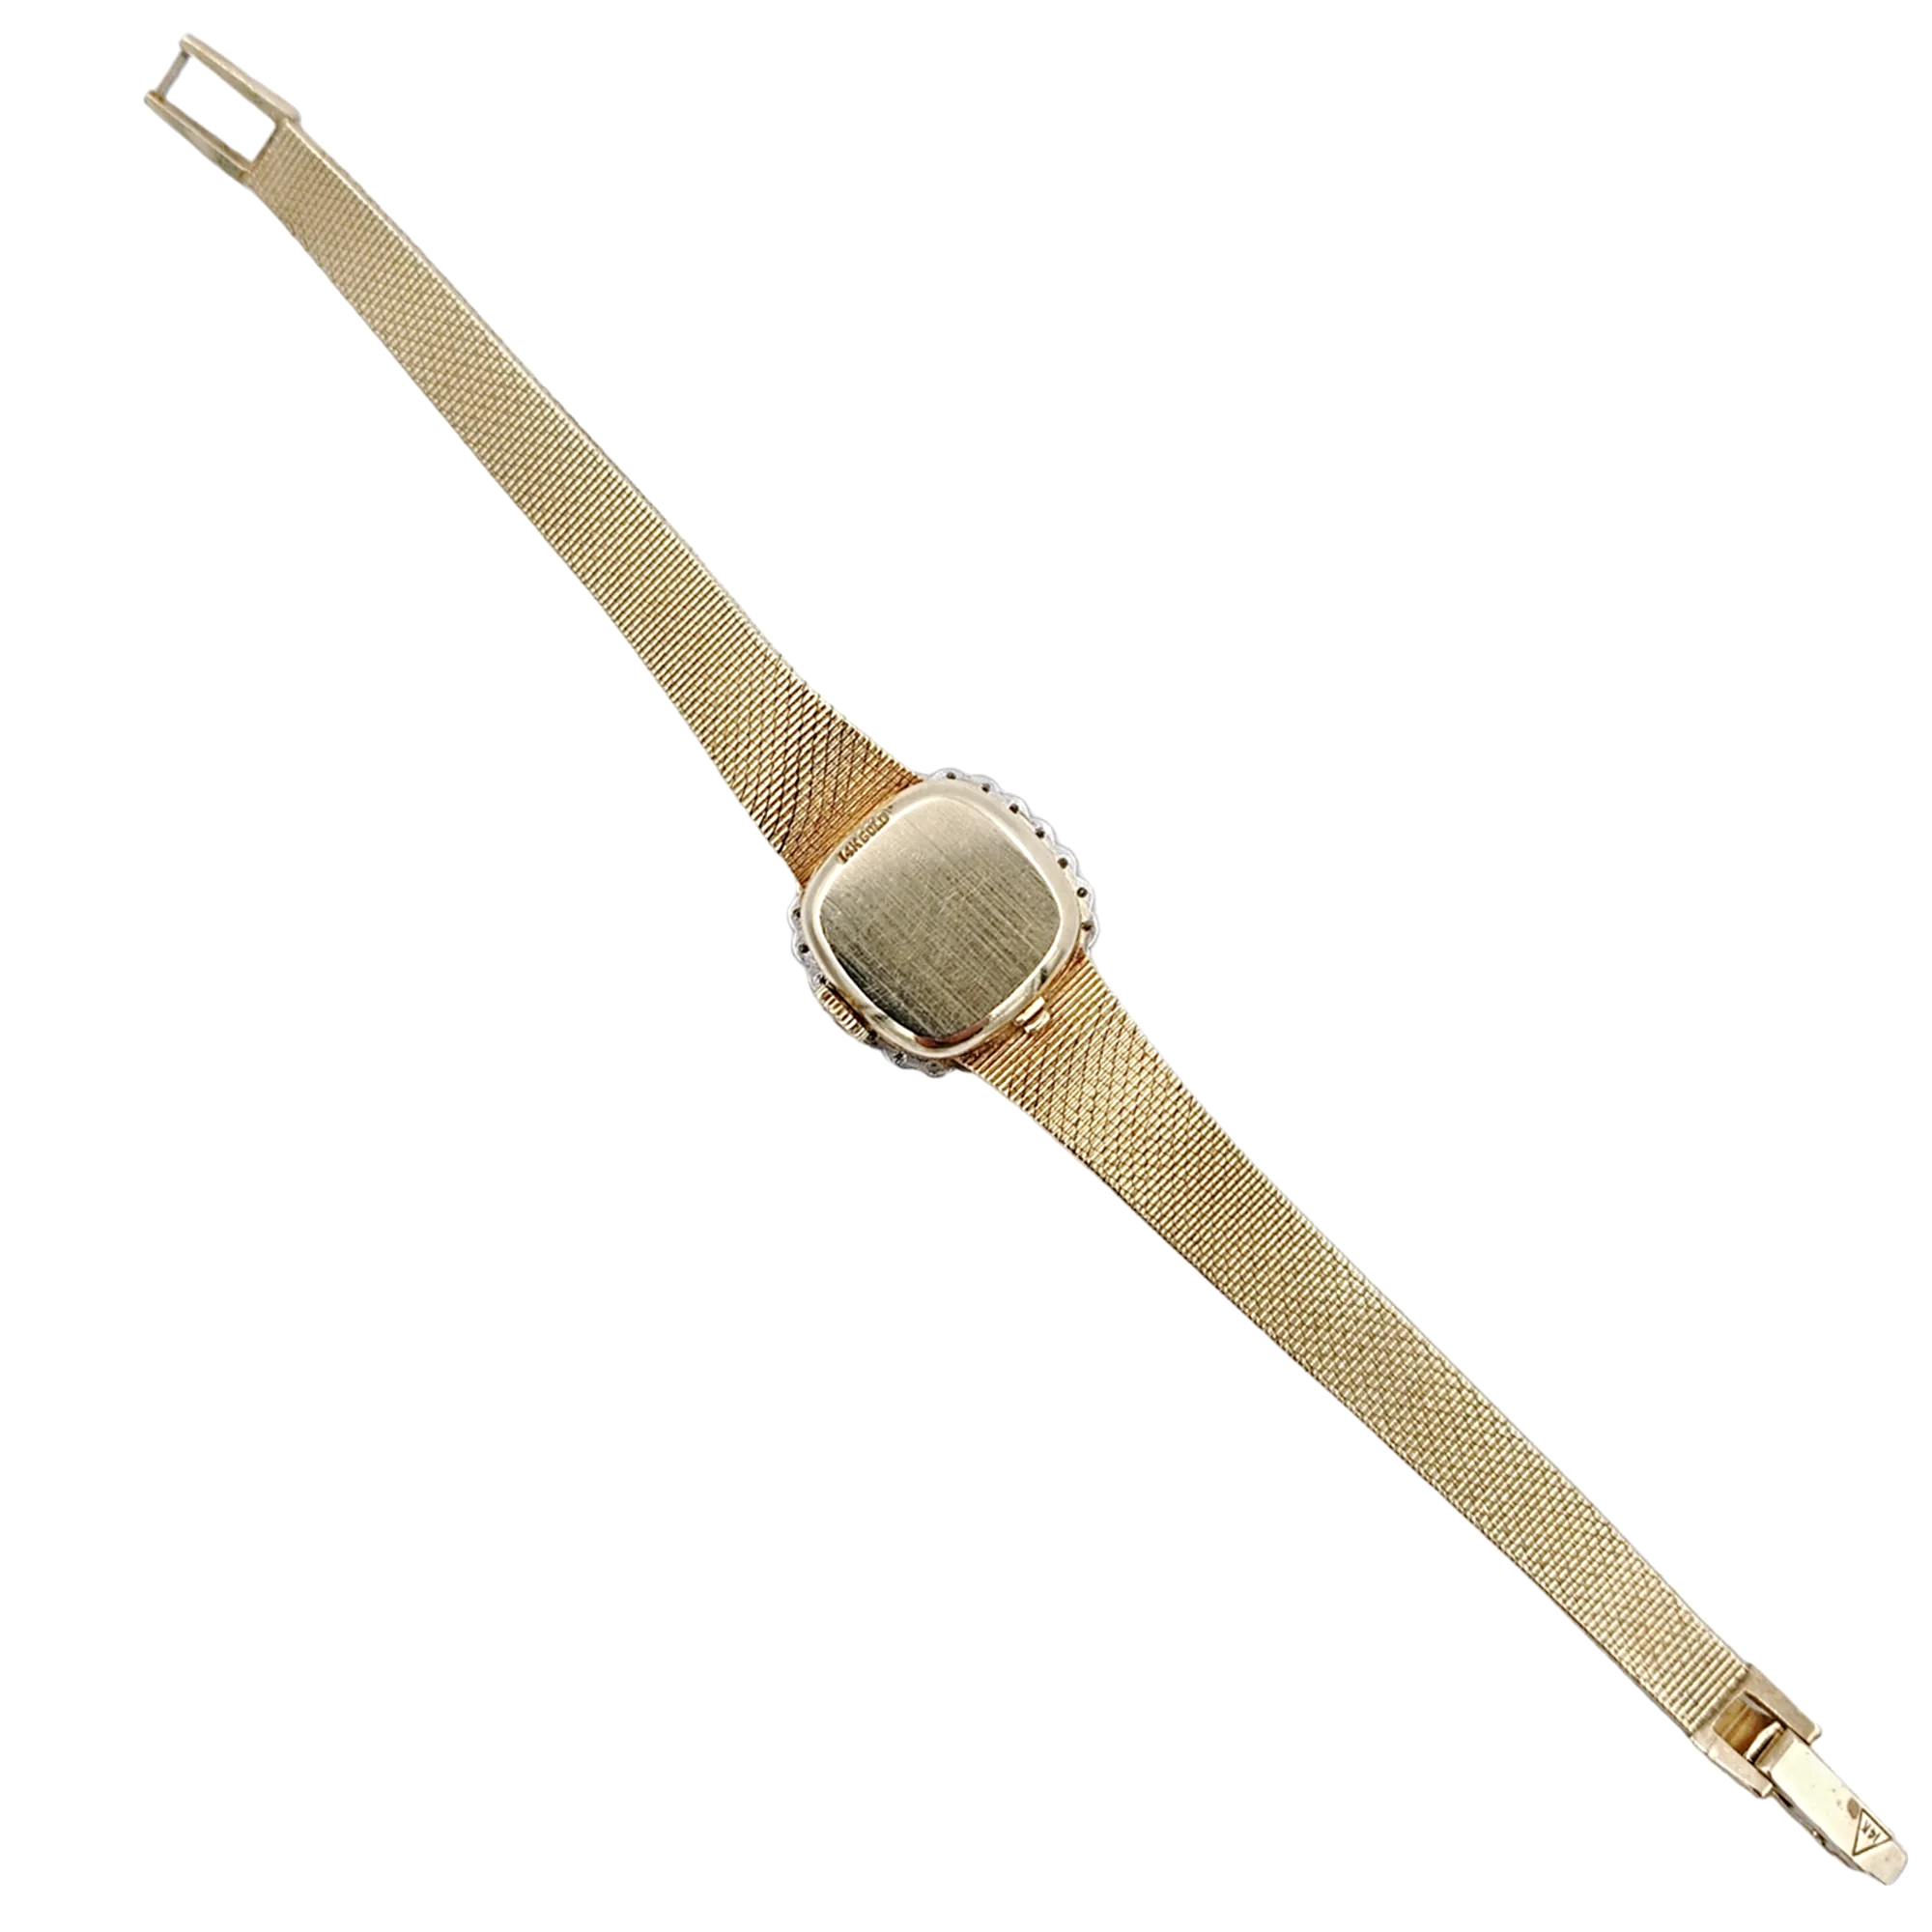 *Ladies Omega 20mm Vintage 14K Yellow Gold Automatic Watch with Gold Dial and Diamond Bezel. (Pre-Owned)